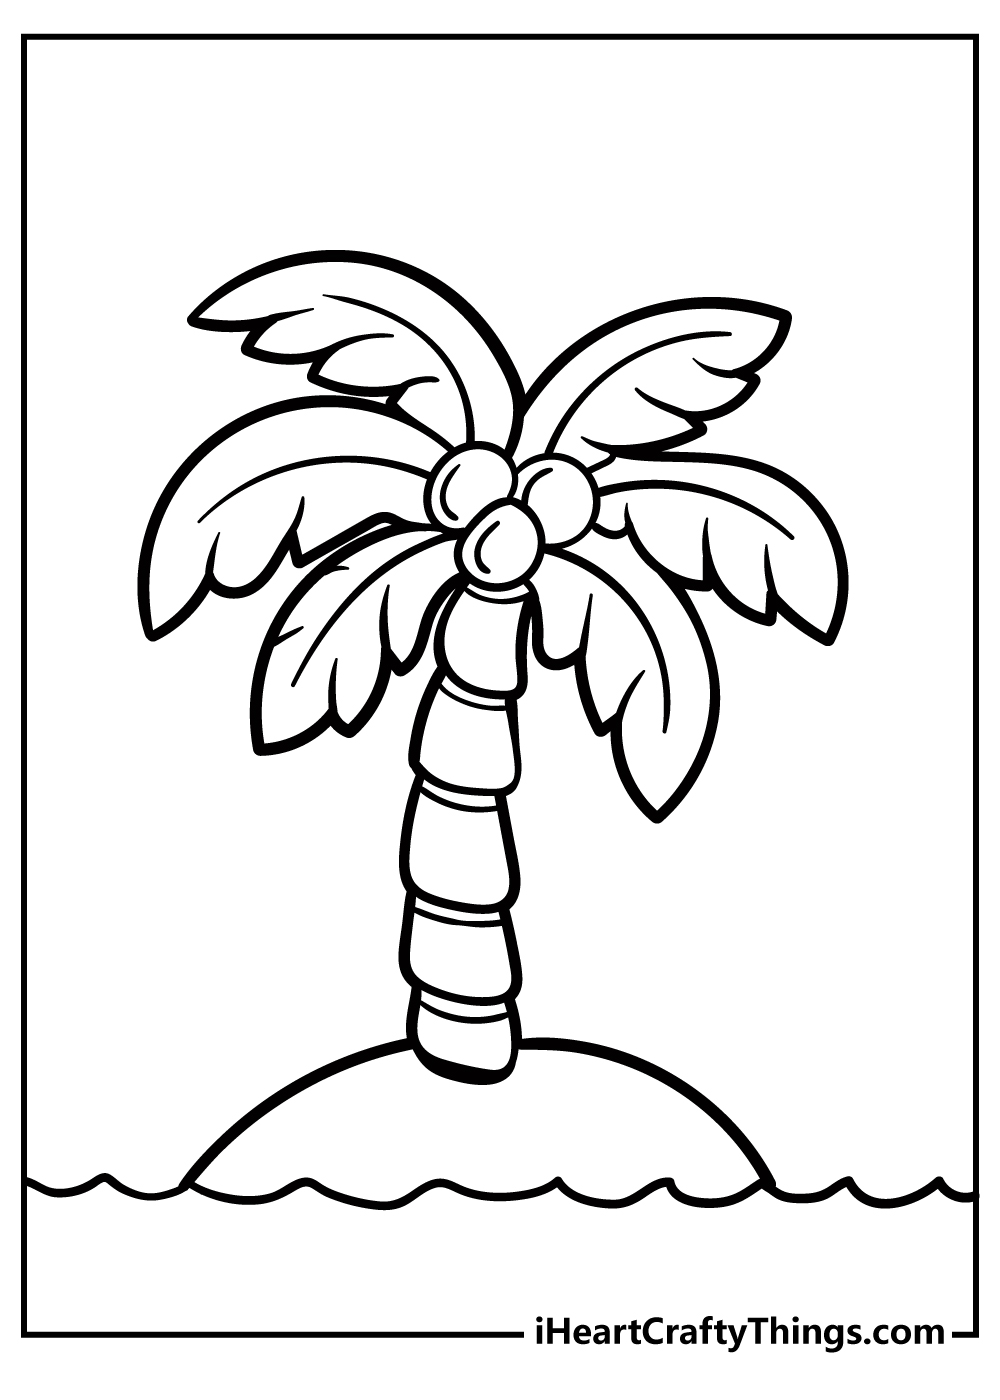 Palm Tree Coloring Pages for kids free download